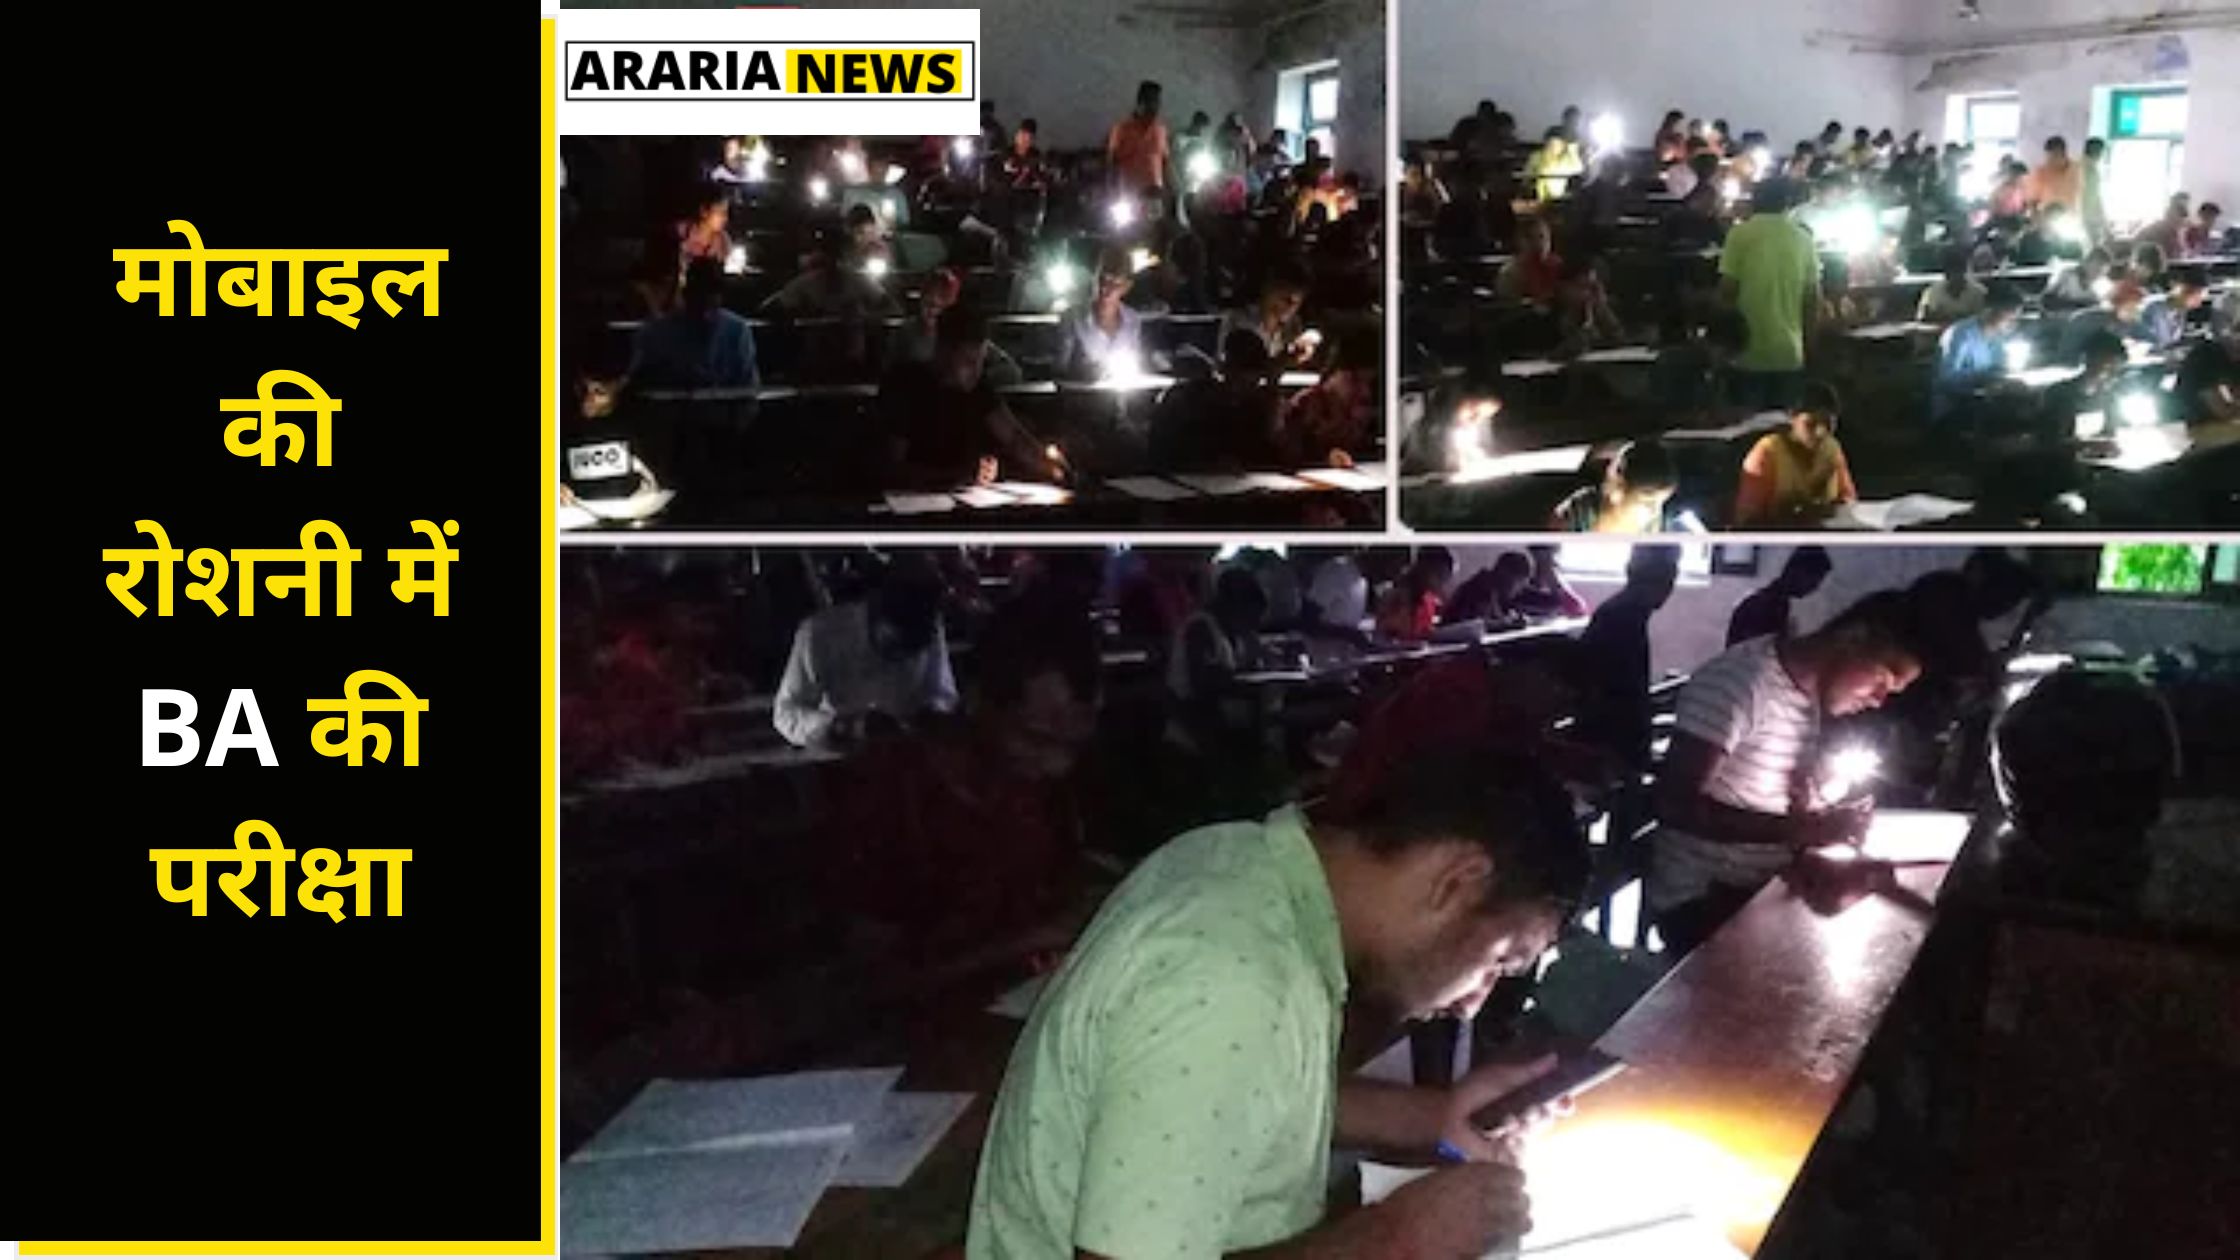 Due to power failure in Mungers RD & DJ College, students had to take the exam in flash light of mobile phones.